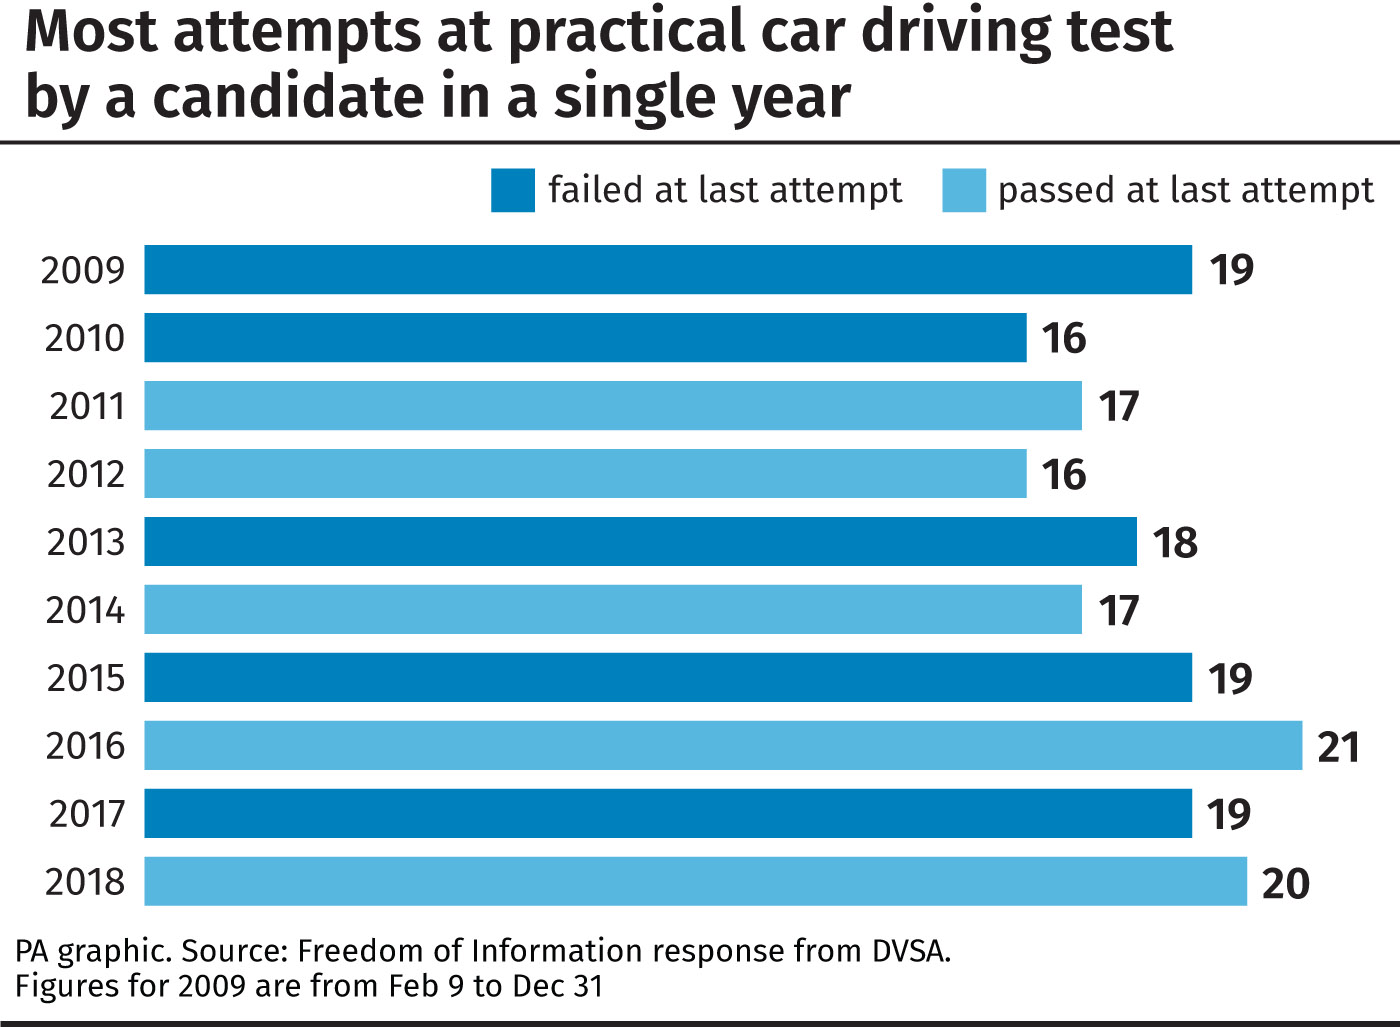 Most attempts at practical car driving test by a candidate in a single year